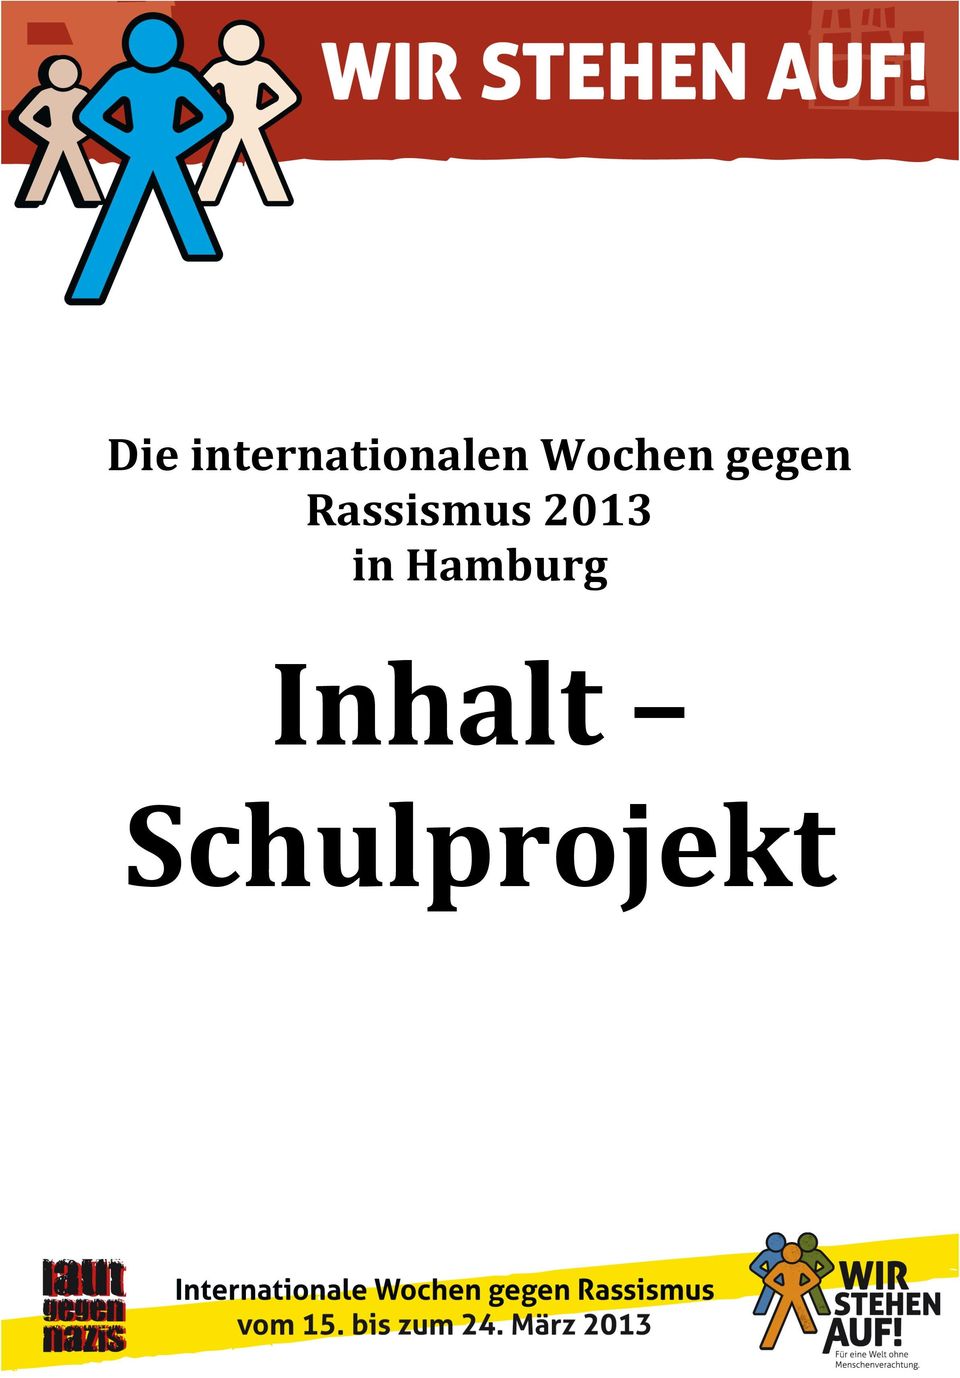 Rassismus 2013 in